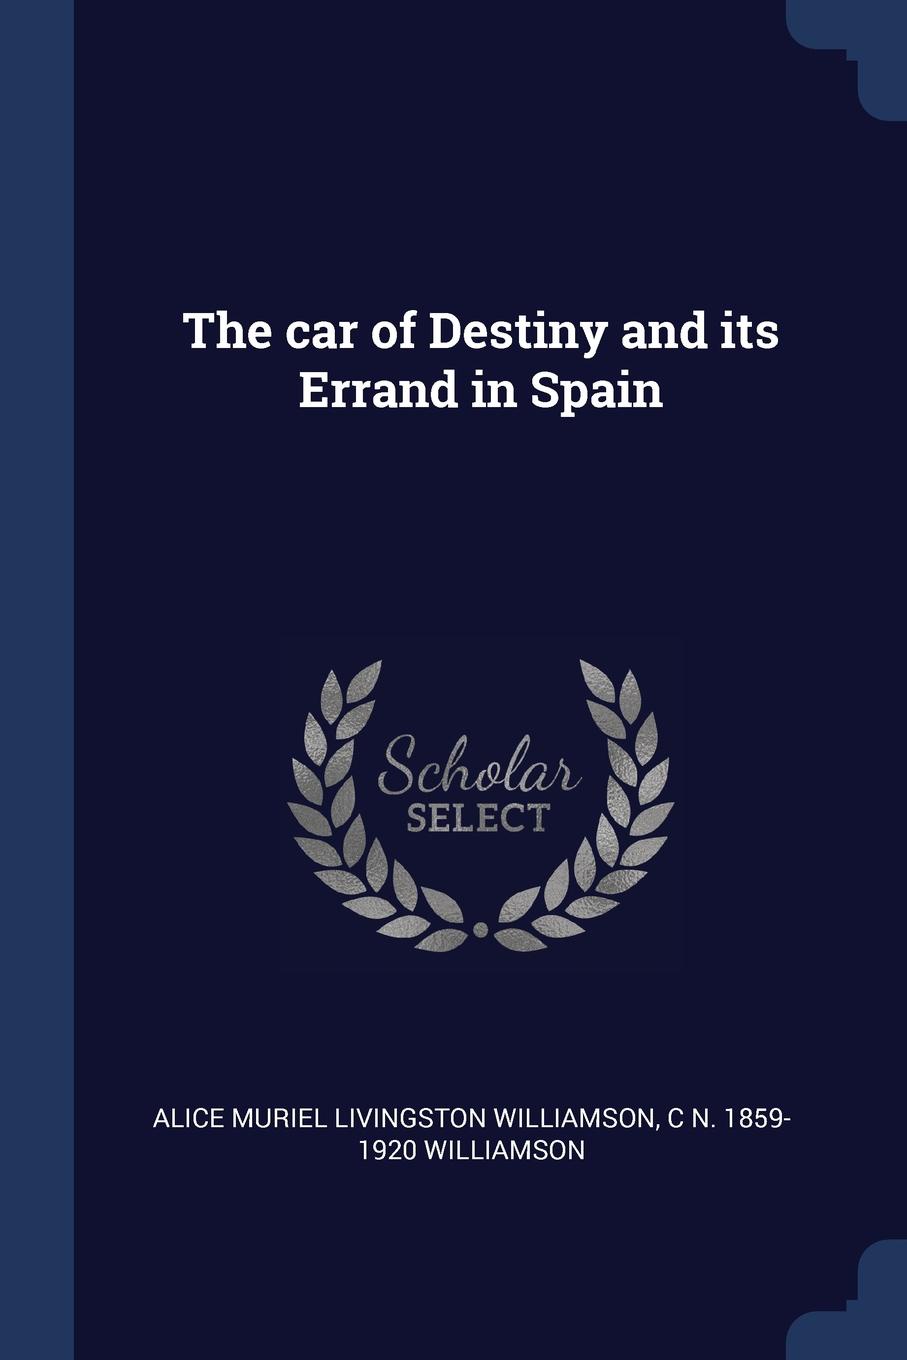 The car of Destiny and its Errand in Spain